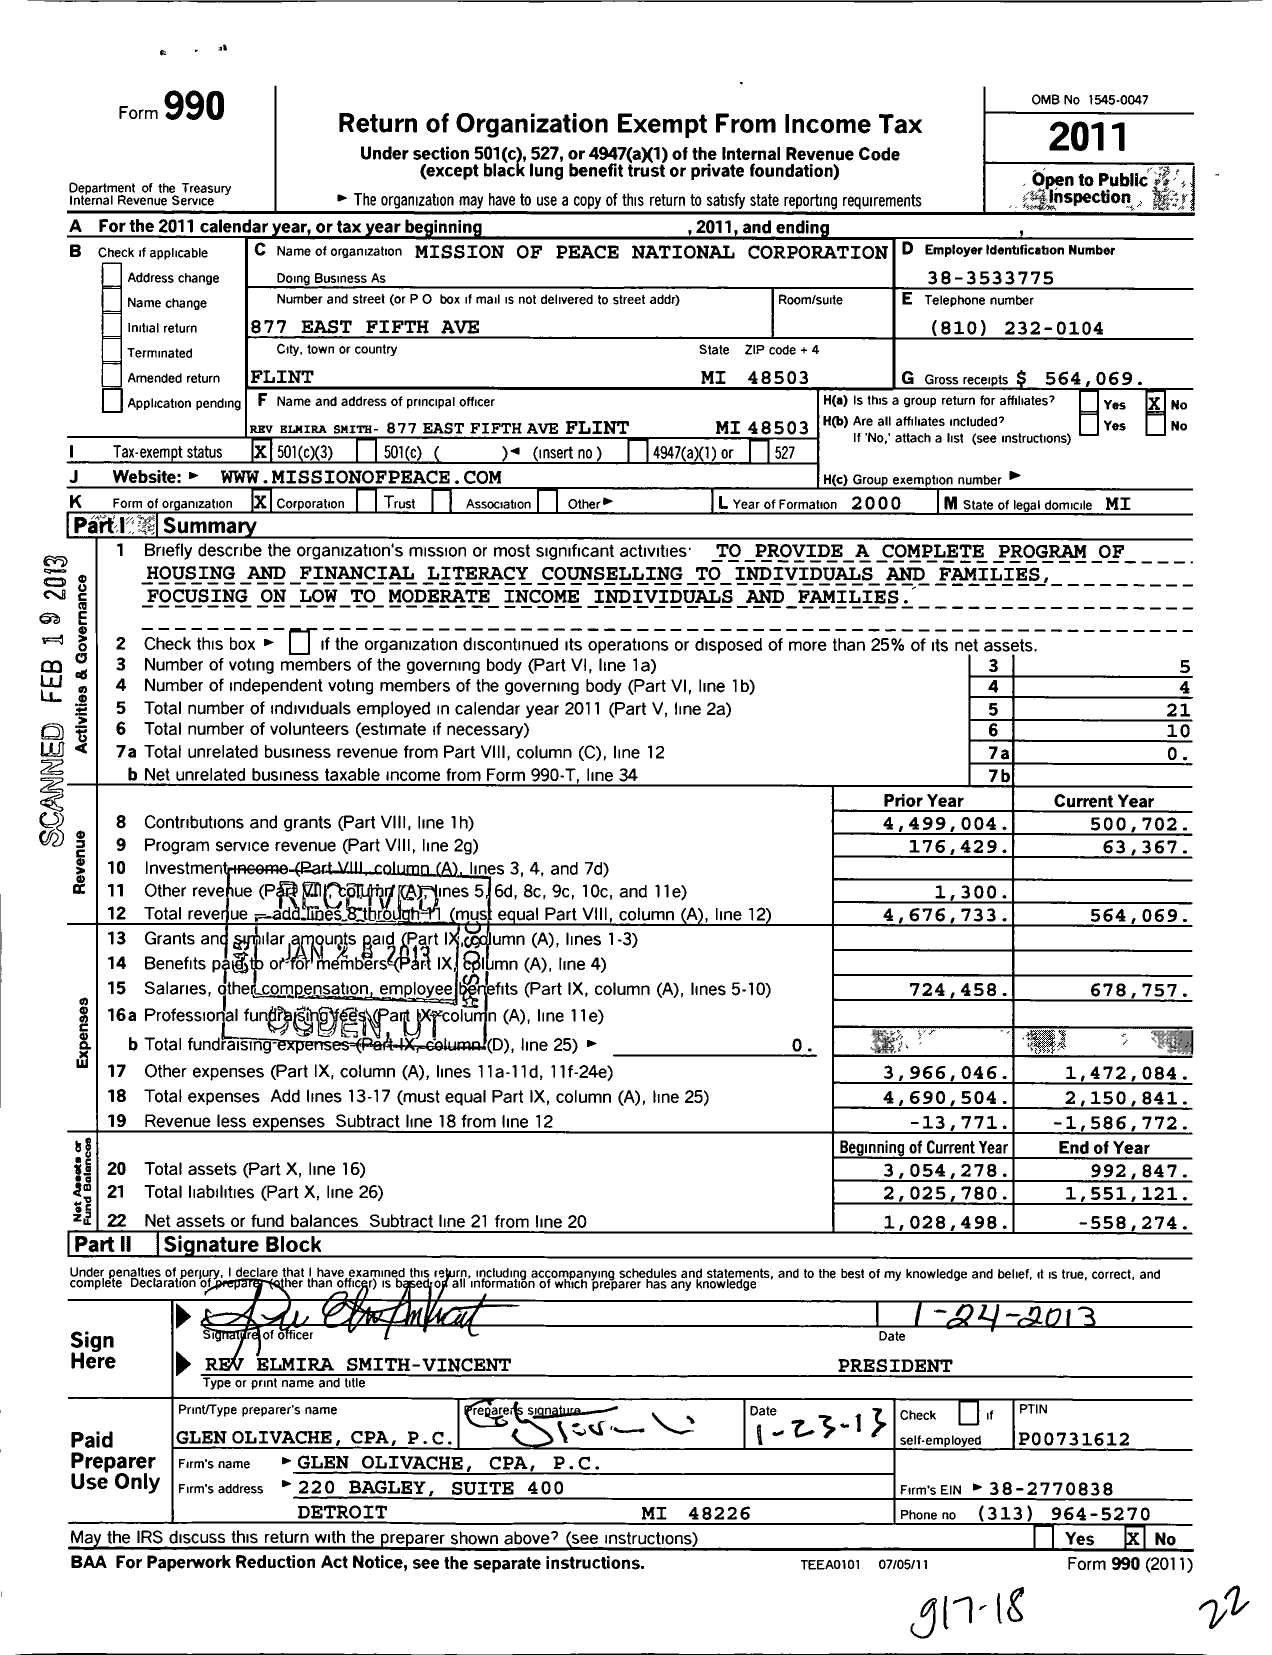 Image of first page of 2011 Form 990 for Mission of Peace National Corporation